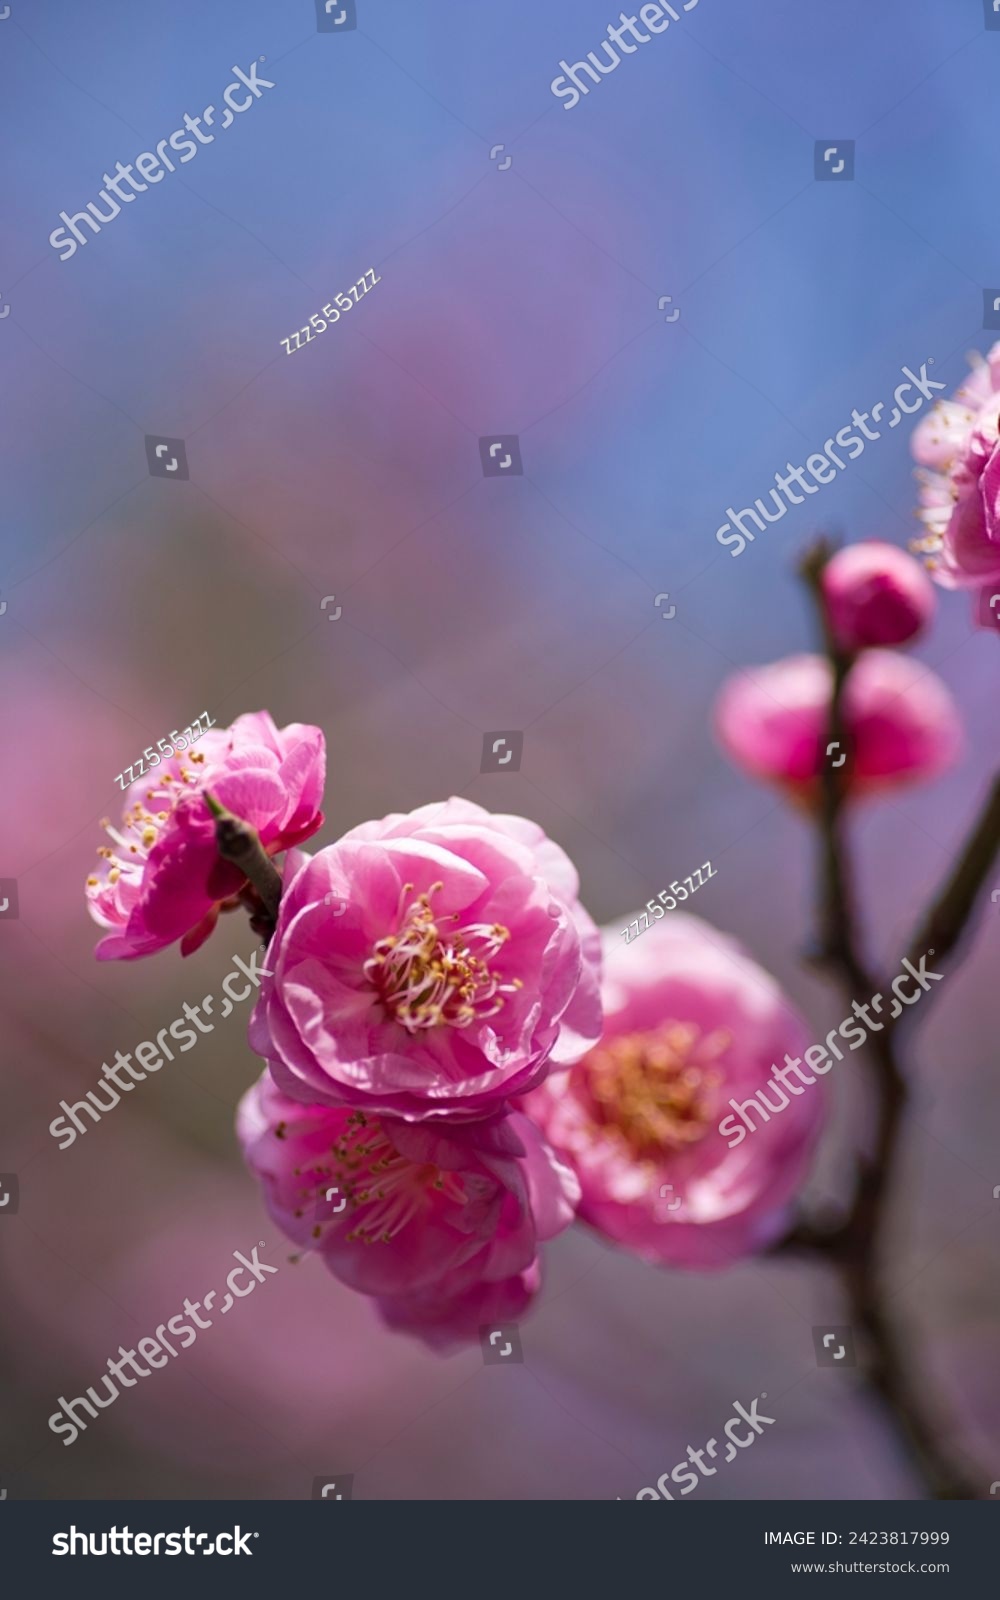 Pink plum blossoms are blooming under the blue sky.
Scientific name is Prunus mume.English name is Japanese apricot. #2423817999